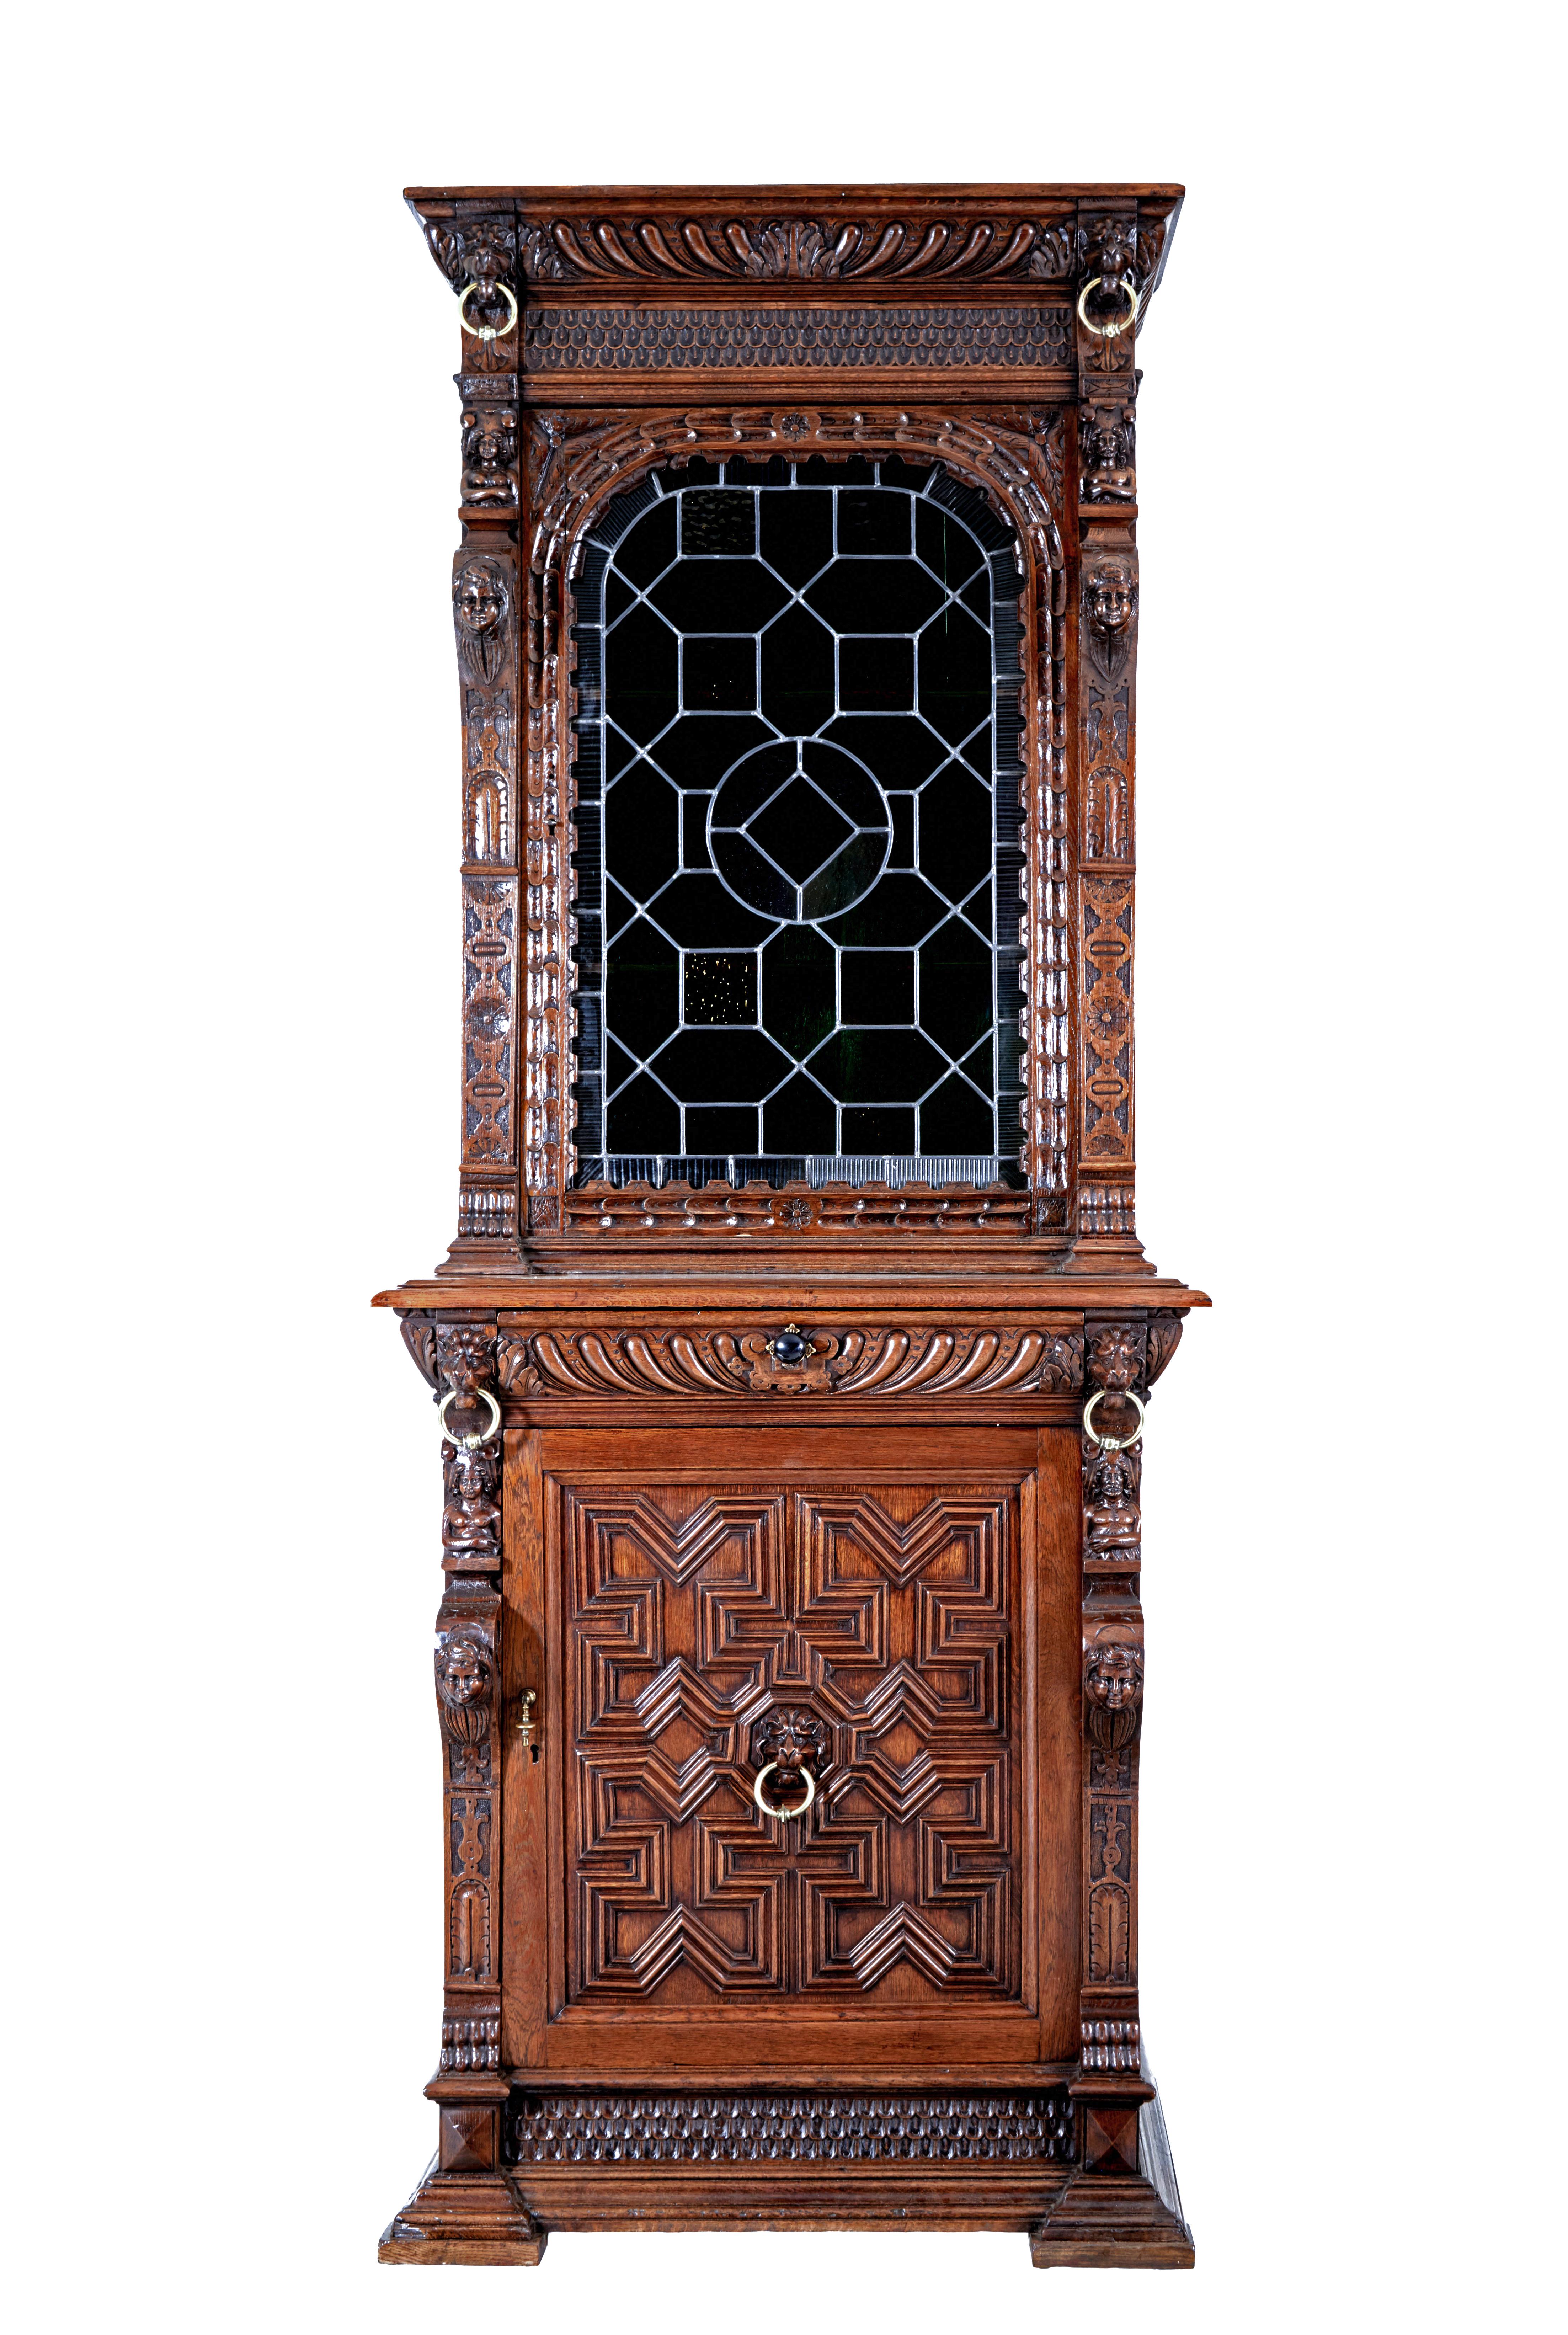 19th century flemish oak and stain glass cabinet circa 1890.

Narrow flemish cabinet comprising of 2 sections, which rarely comes with its original stained glass panel in the top section.  Profusely carved with lion heads and brass ring details. 